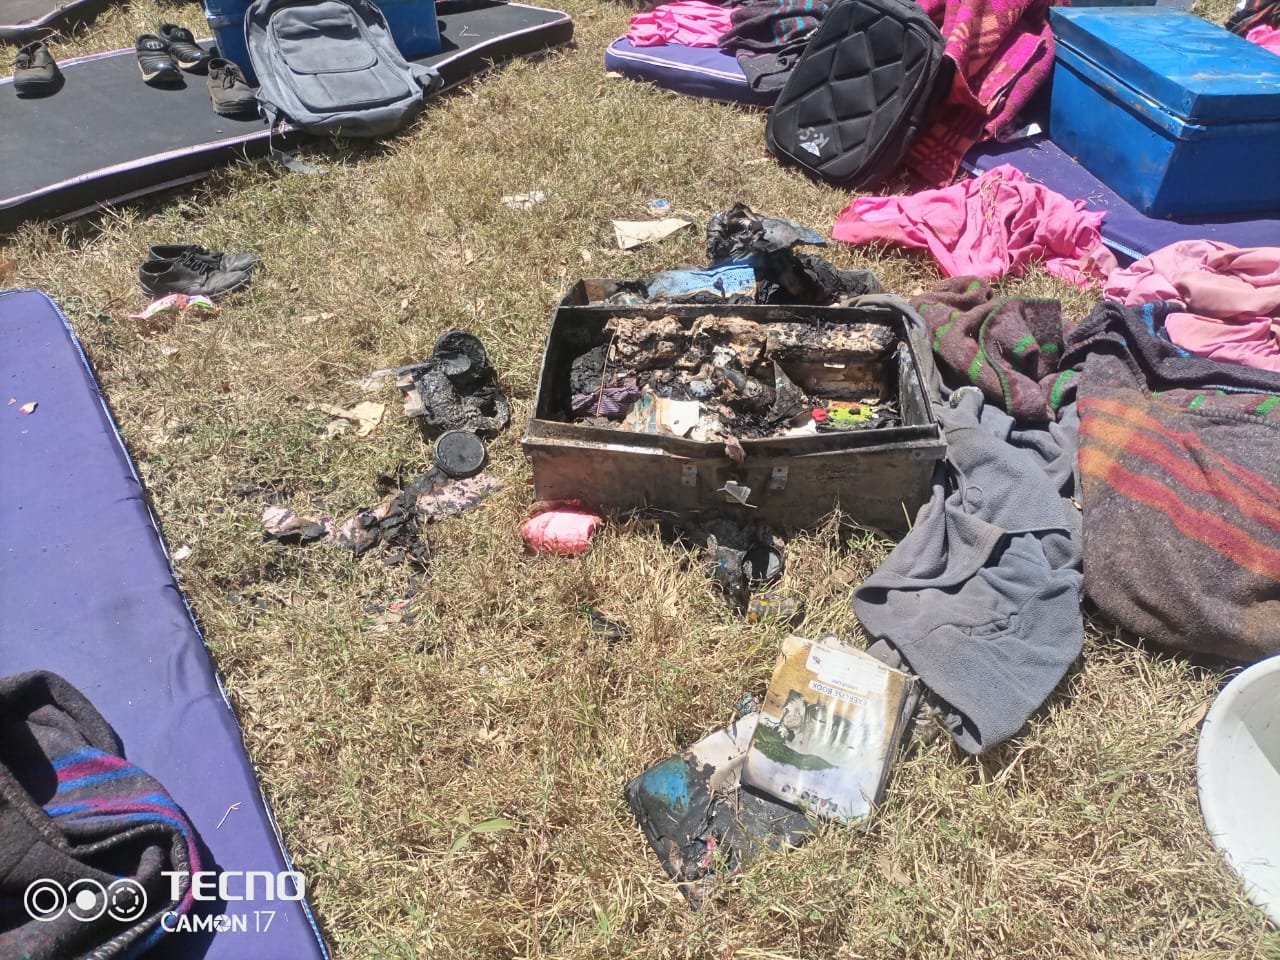 Scorched belongings amidst chaos after fire